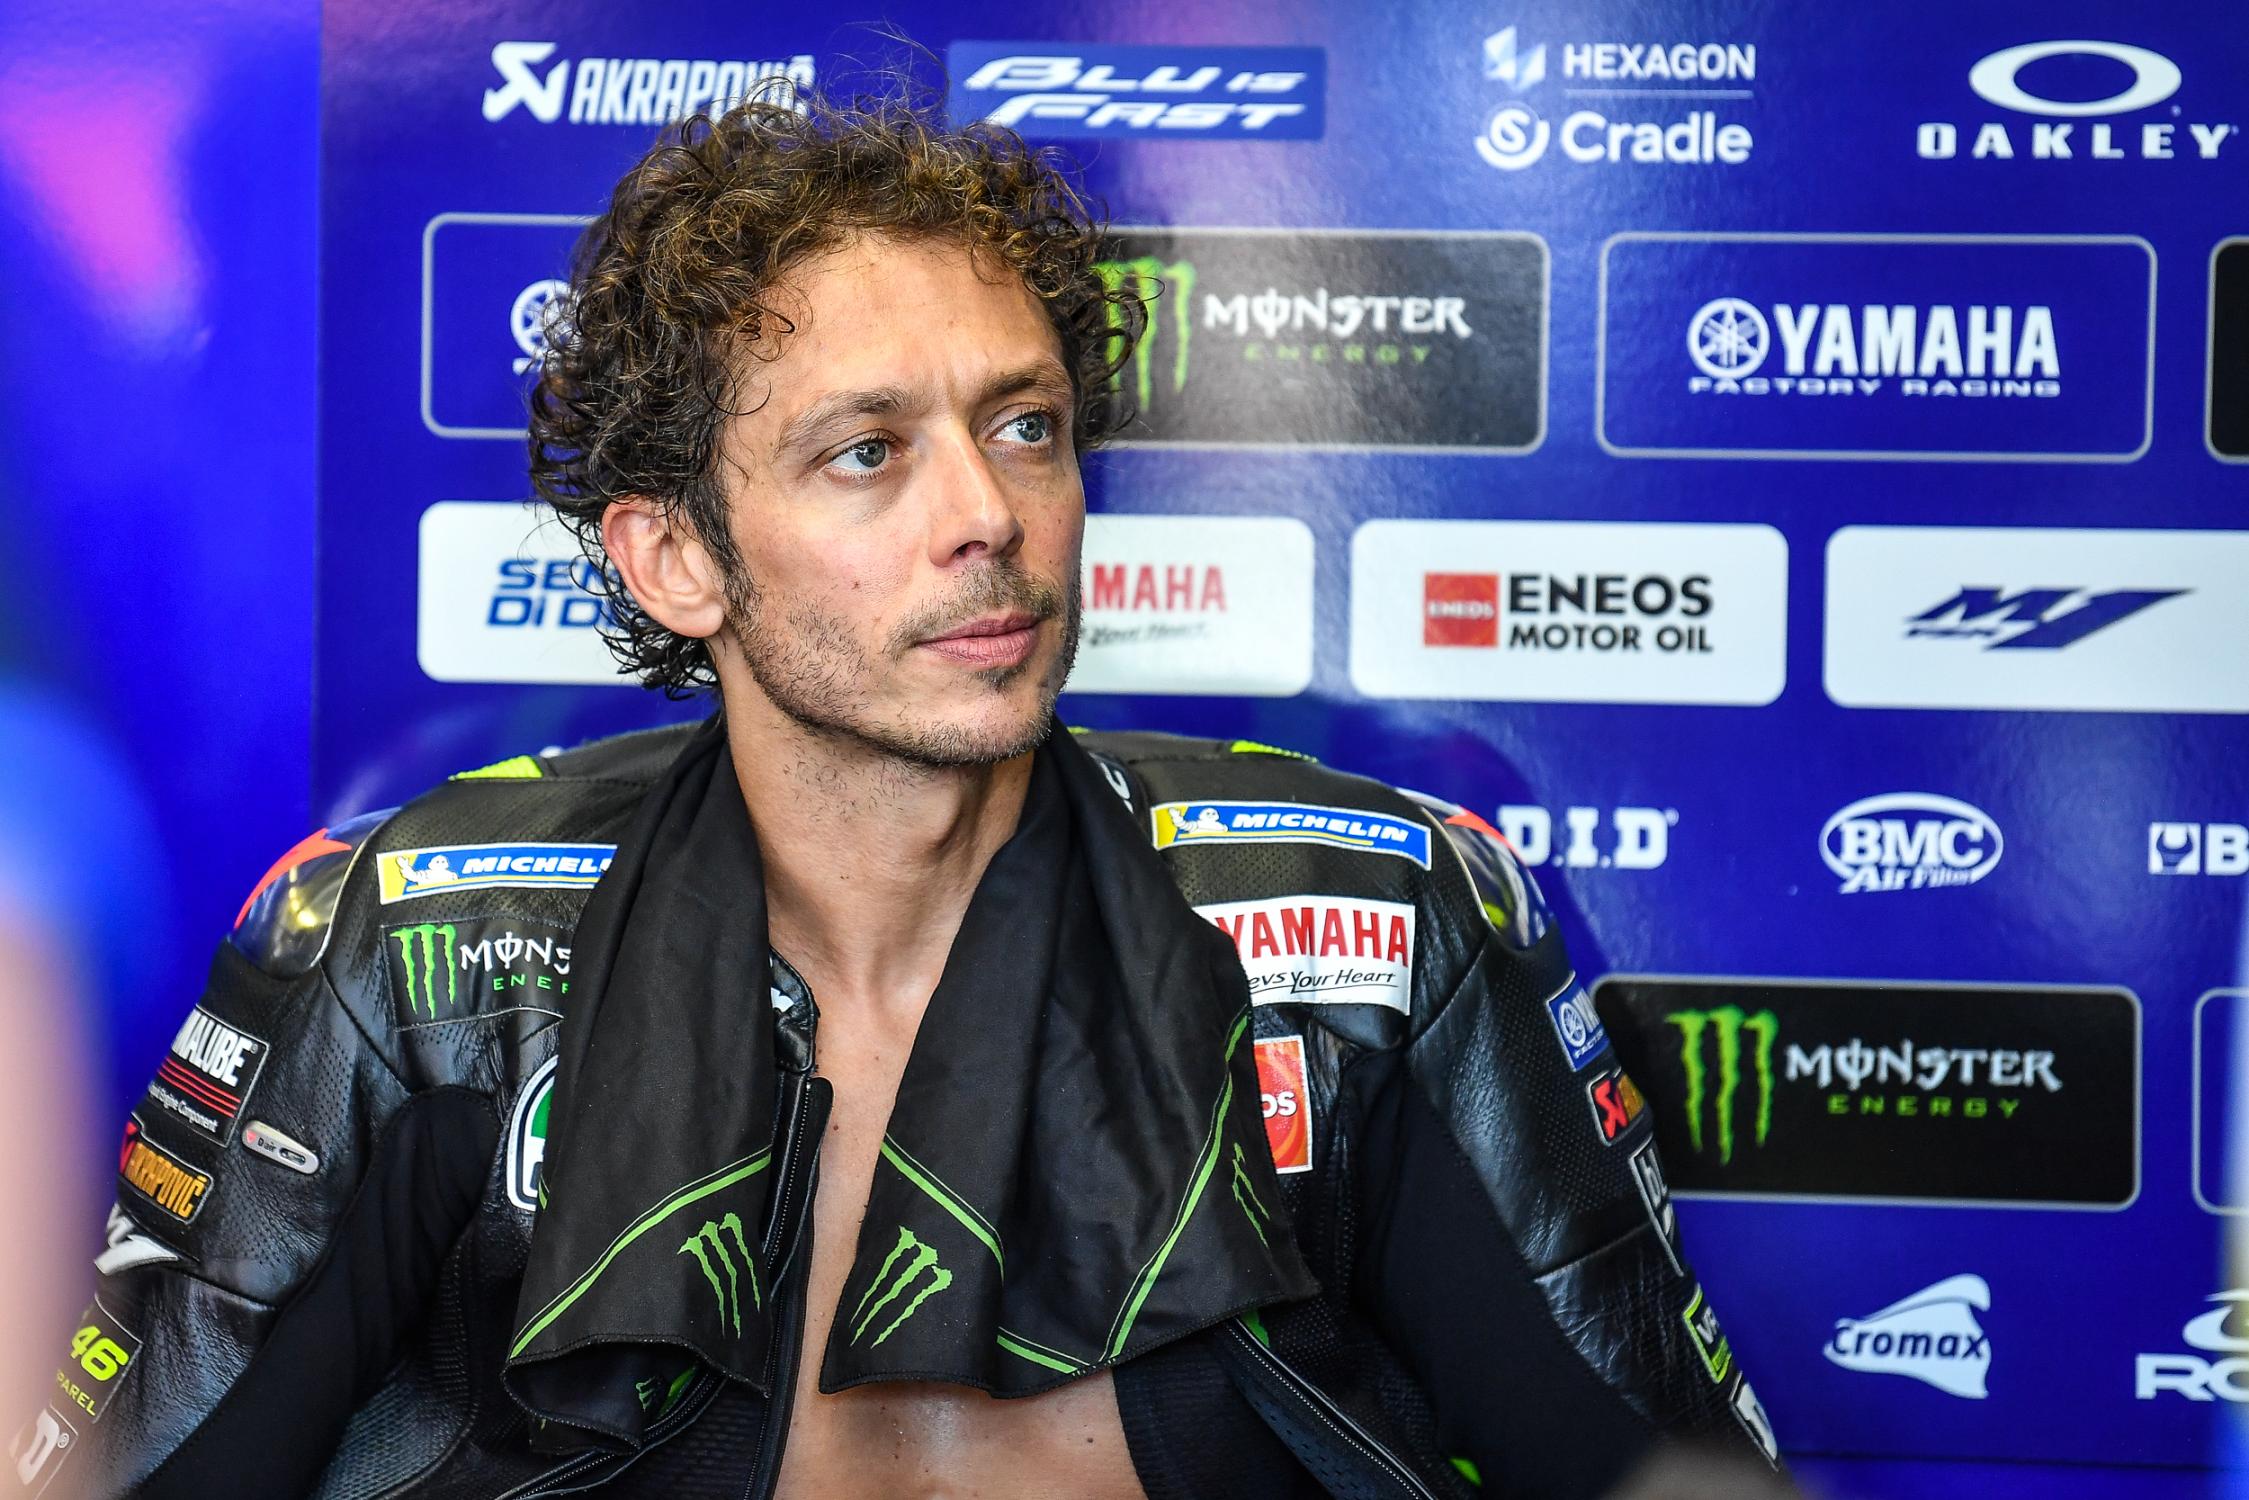 BREAKING NEWS: Valentino Rossi tests positive for COVID-19, will miss ...